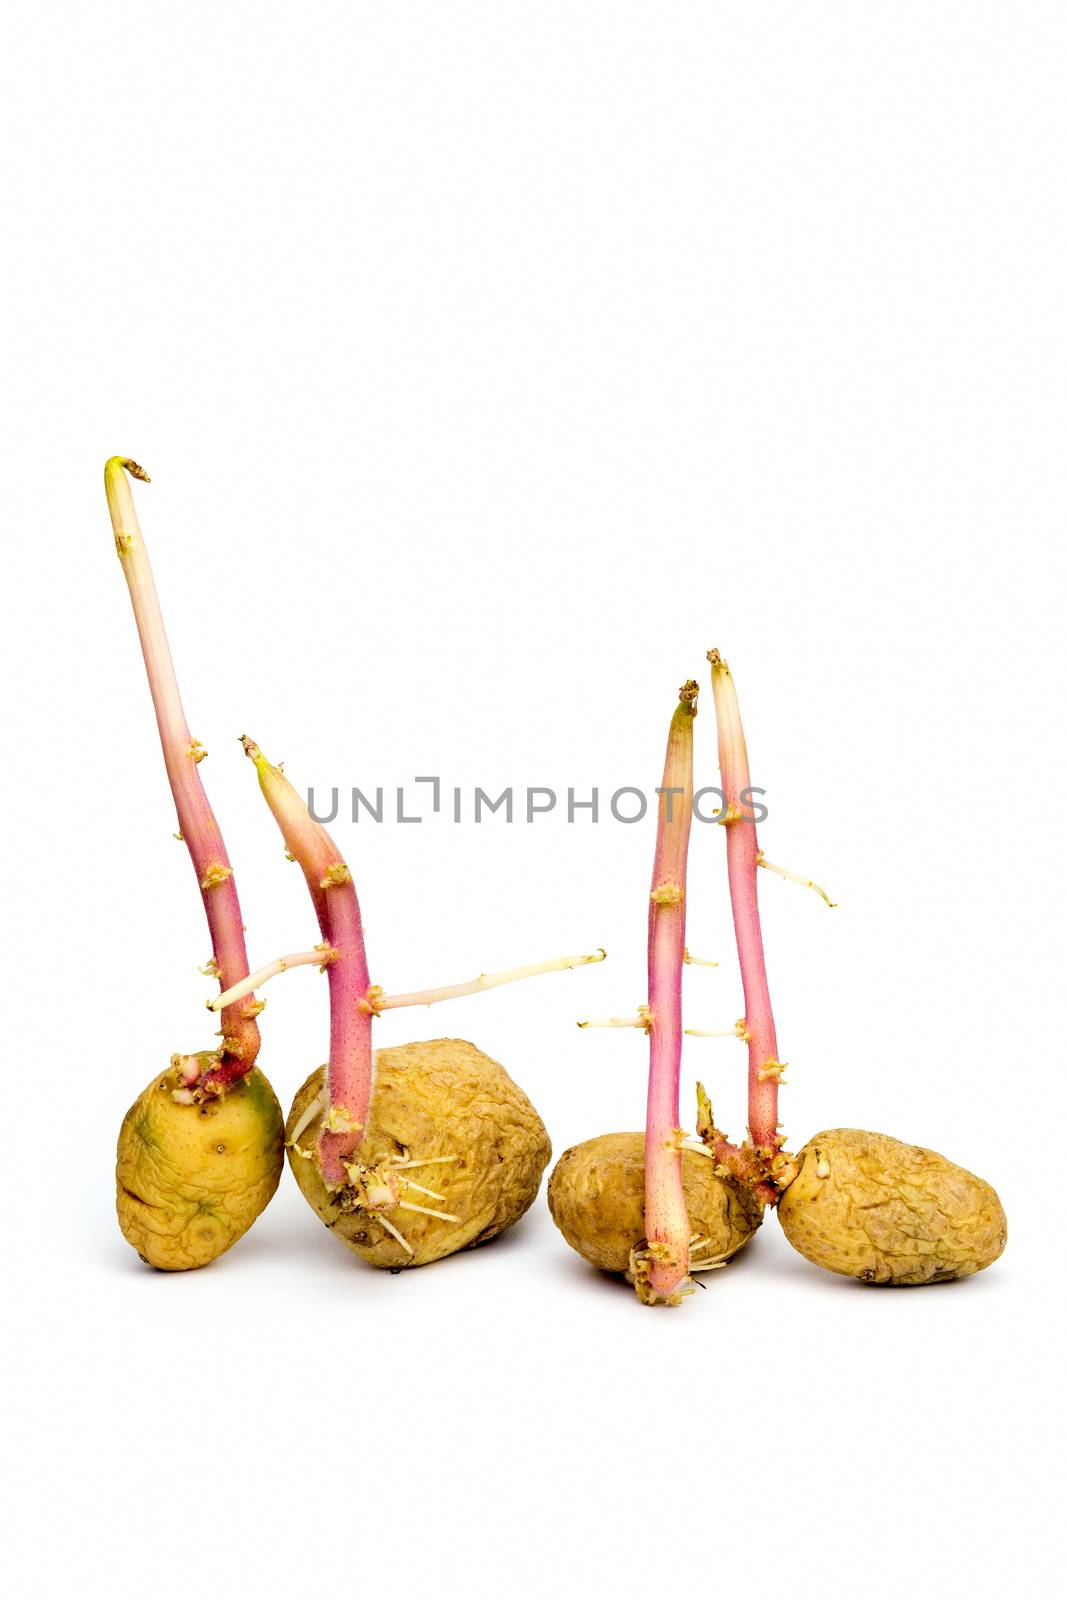 Several potatoes growing with hairy stems  isolated on white bac by BenSchonewille